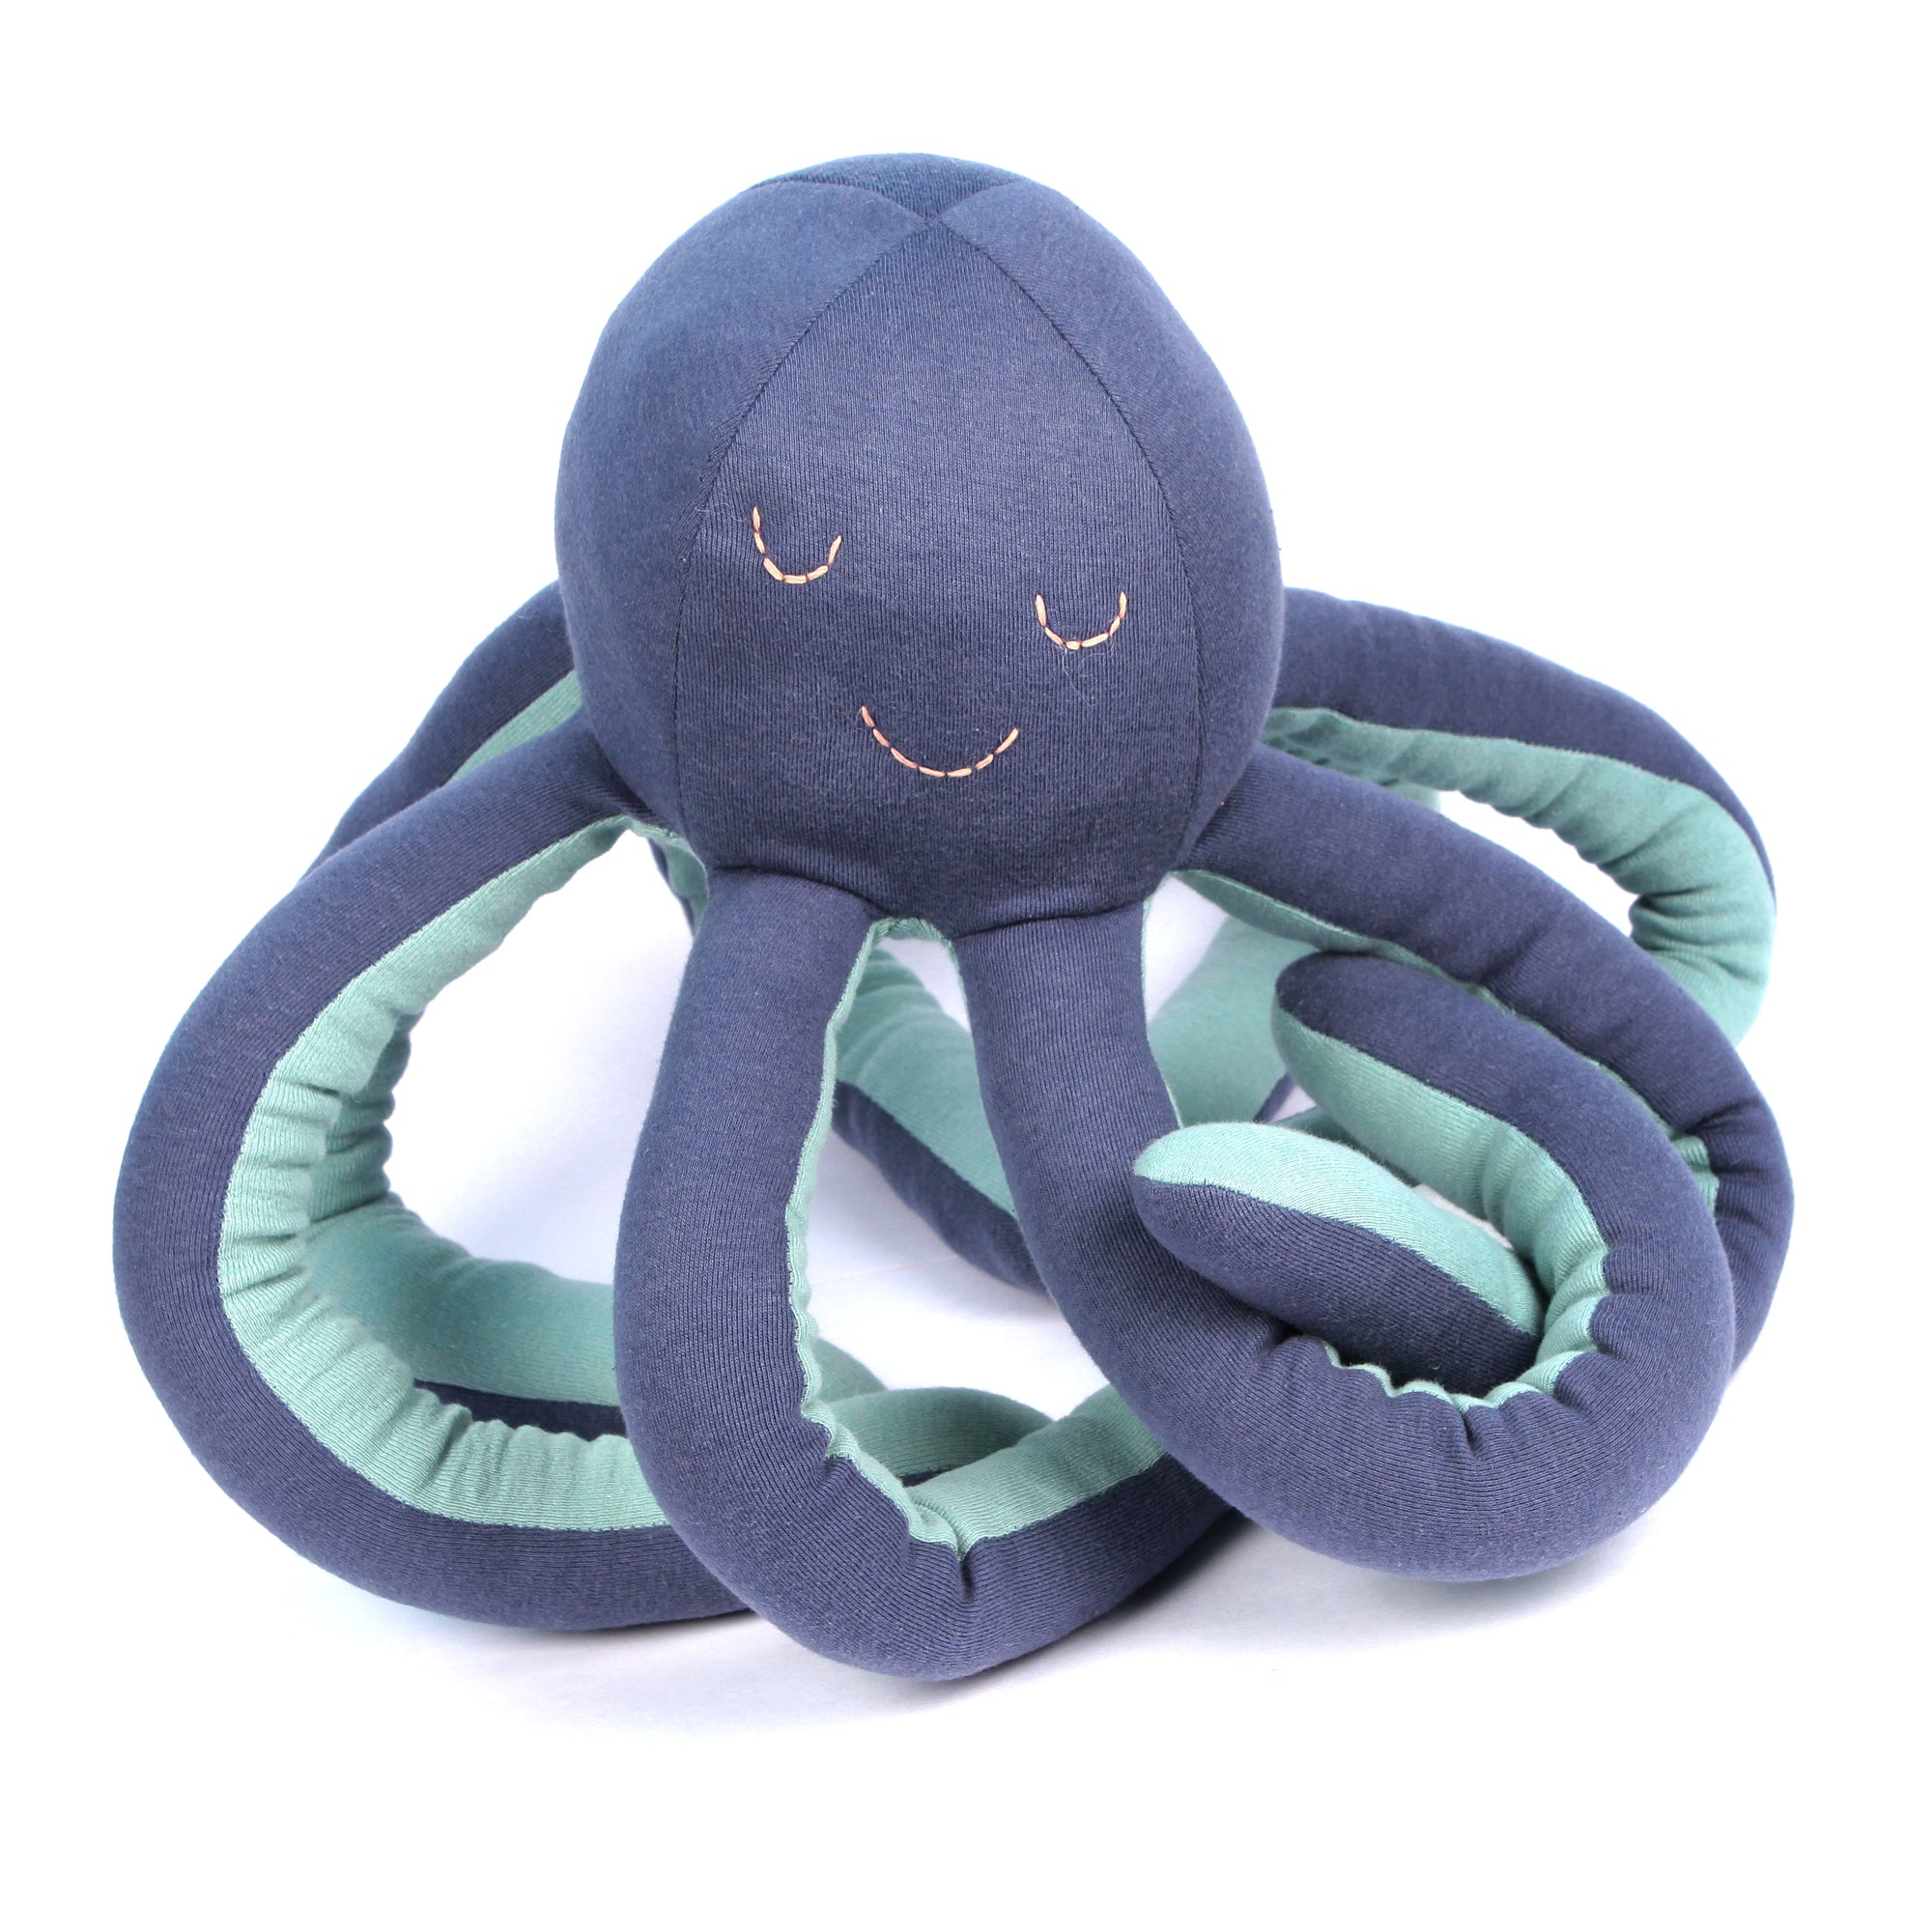 Octopus Stuffed Animal Baby Soft Toys Birthday Gifts for Kids (19 inches) (Blue Octopus)